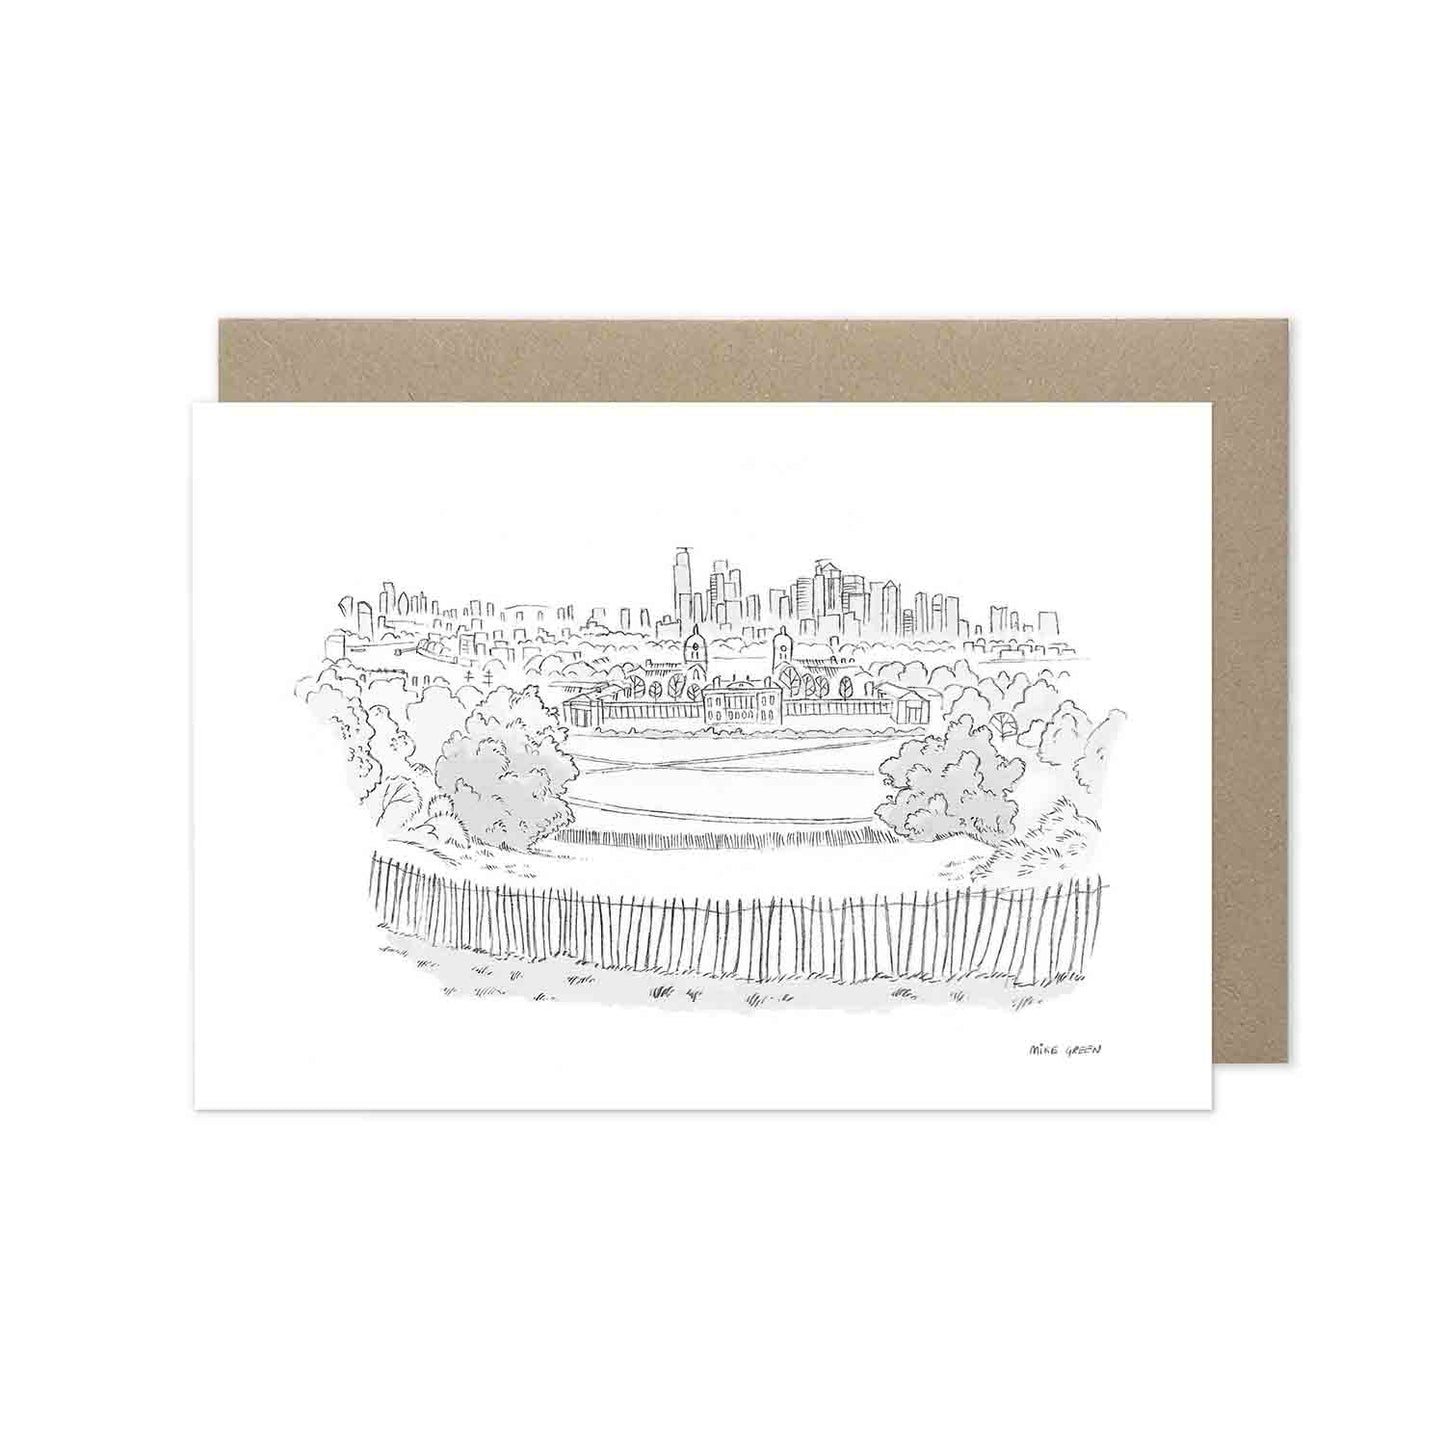 The view from Greenwich beautifully sketched on a greeting card by mike green illustration.